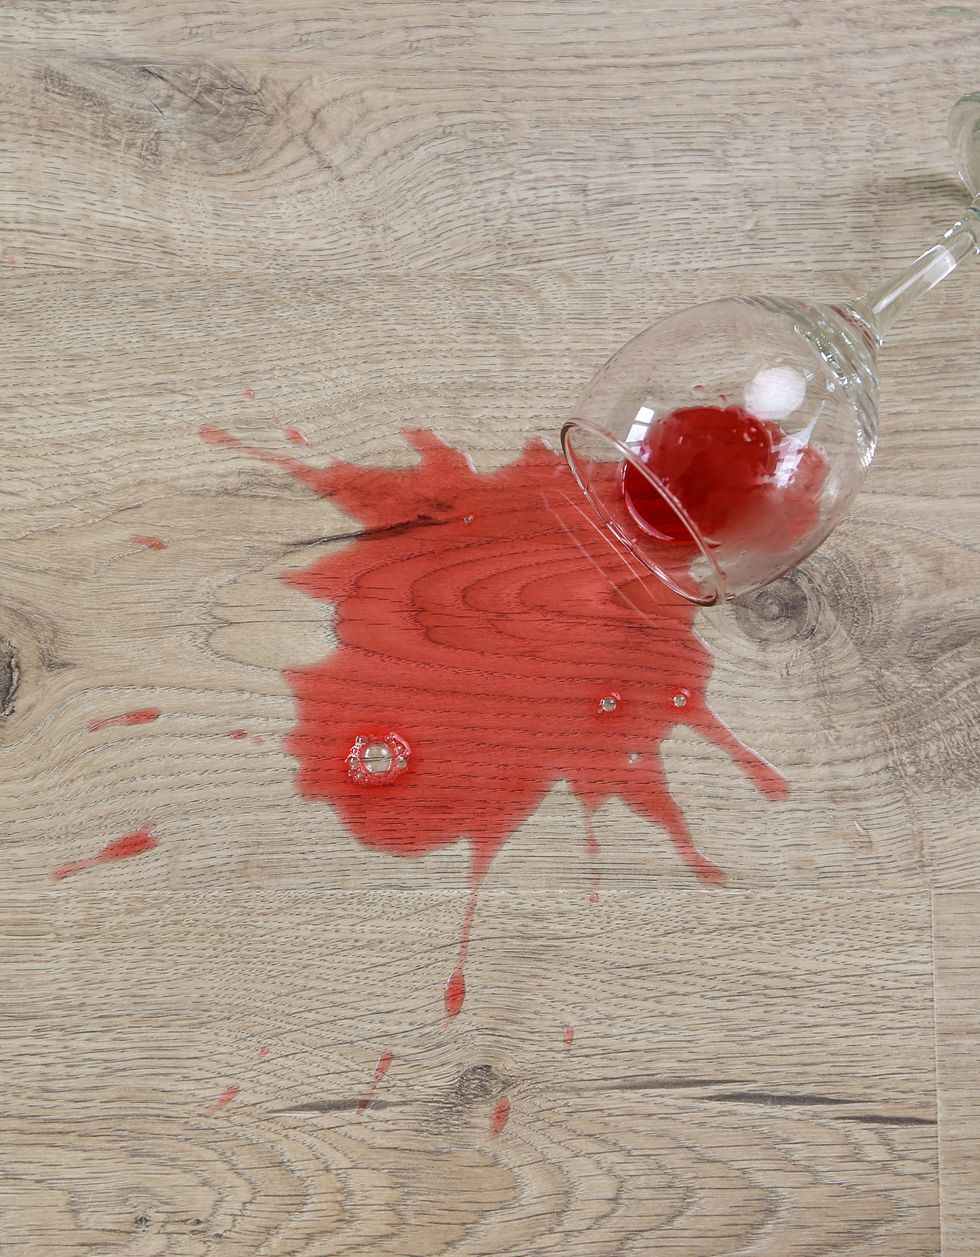 glass of red wine fell on laminate, wine spilled on floor flat lay top view